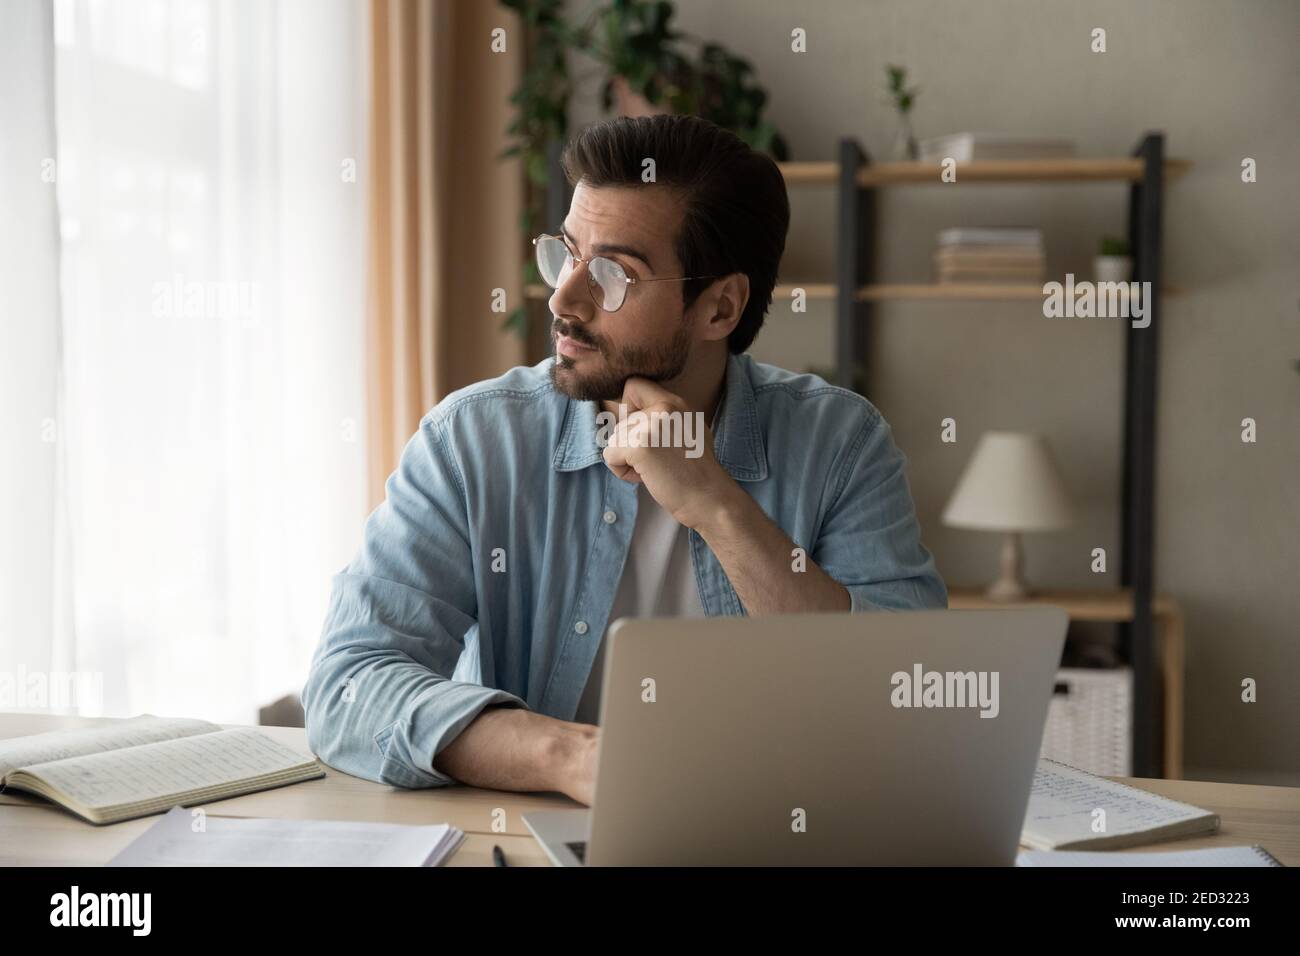 Thoughtful businessman analyze information in mind distracted from laptop screen Stock Photo